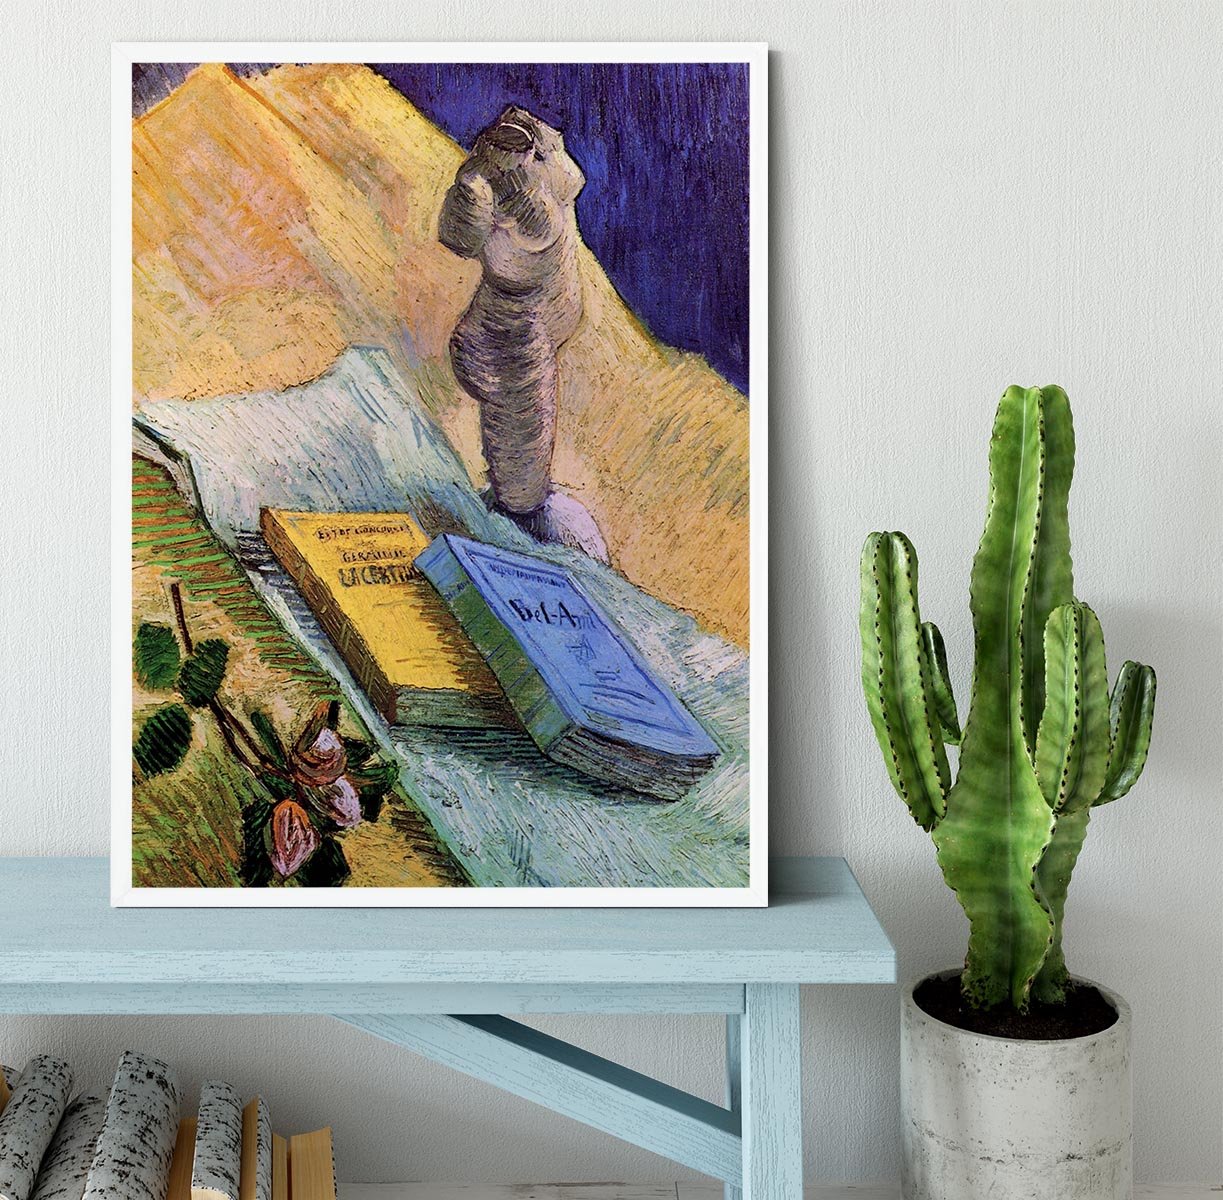 Still Life with Plaster Statuette a Rose and Two Novels by Van Gogh Framed Print - Canvas Art Rocks -6